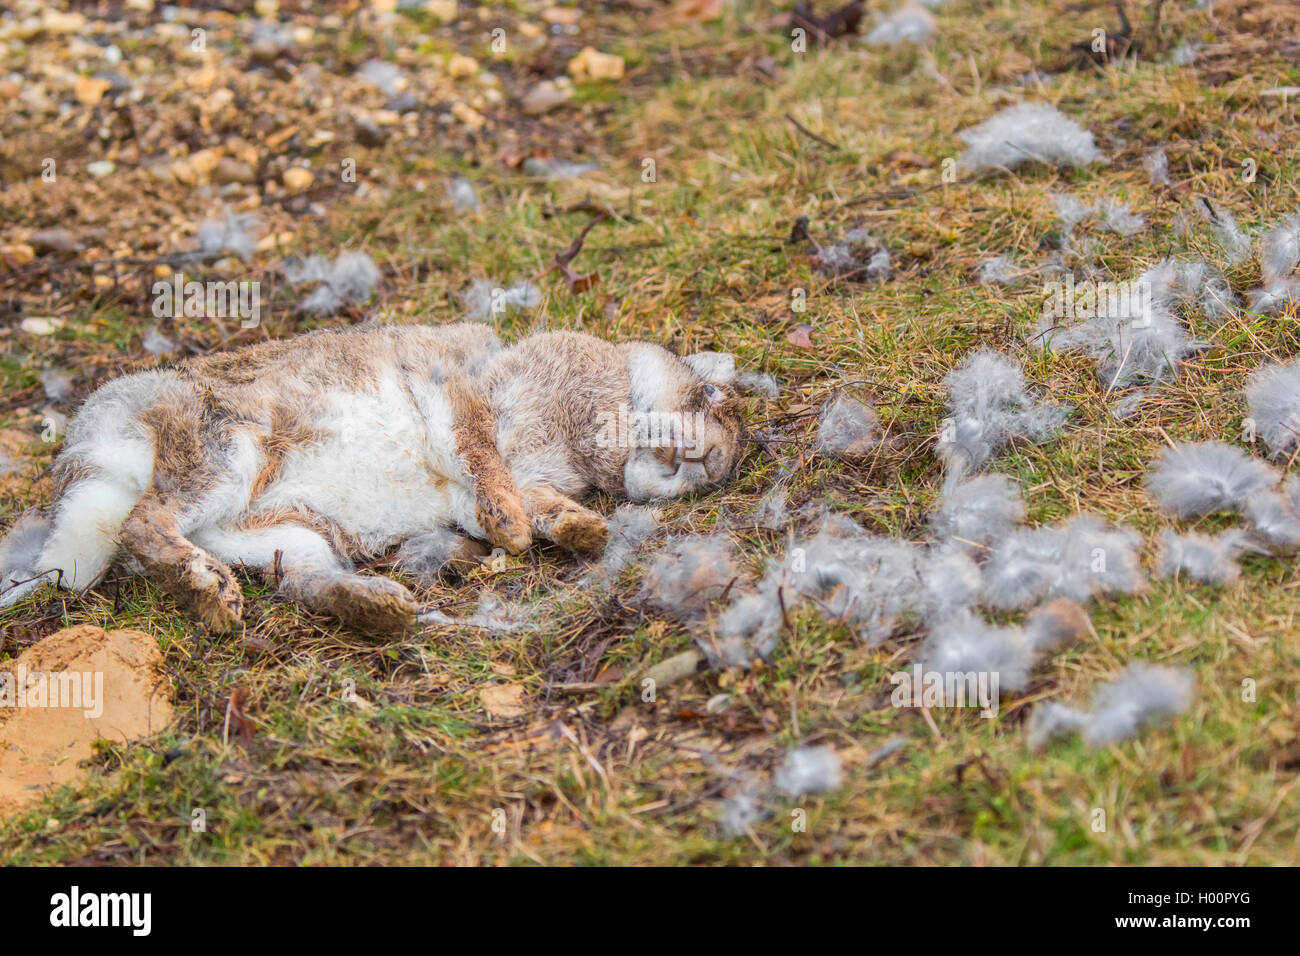 European rabbit (Oryctolagus cuniculus), picked by a bird of prey, Germany Stock Photo